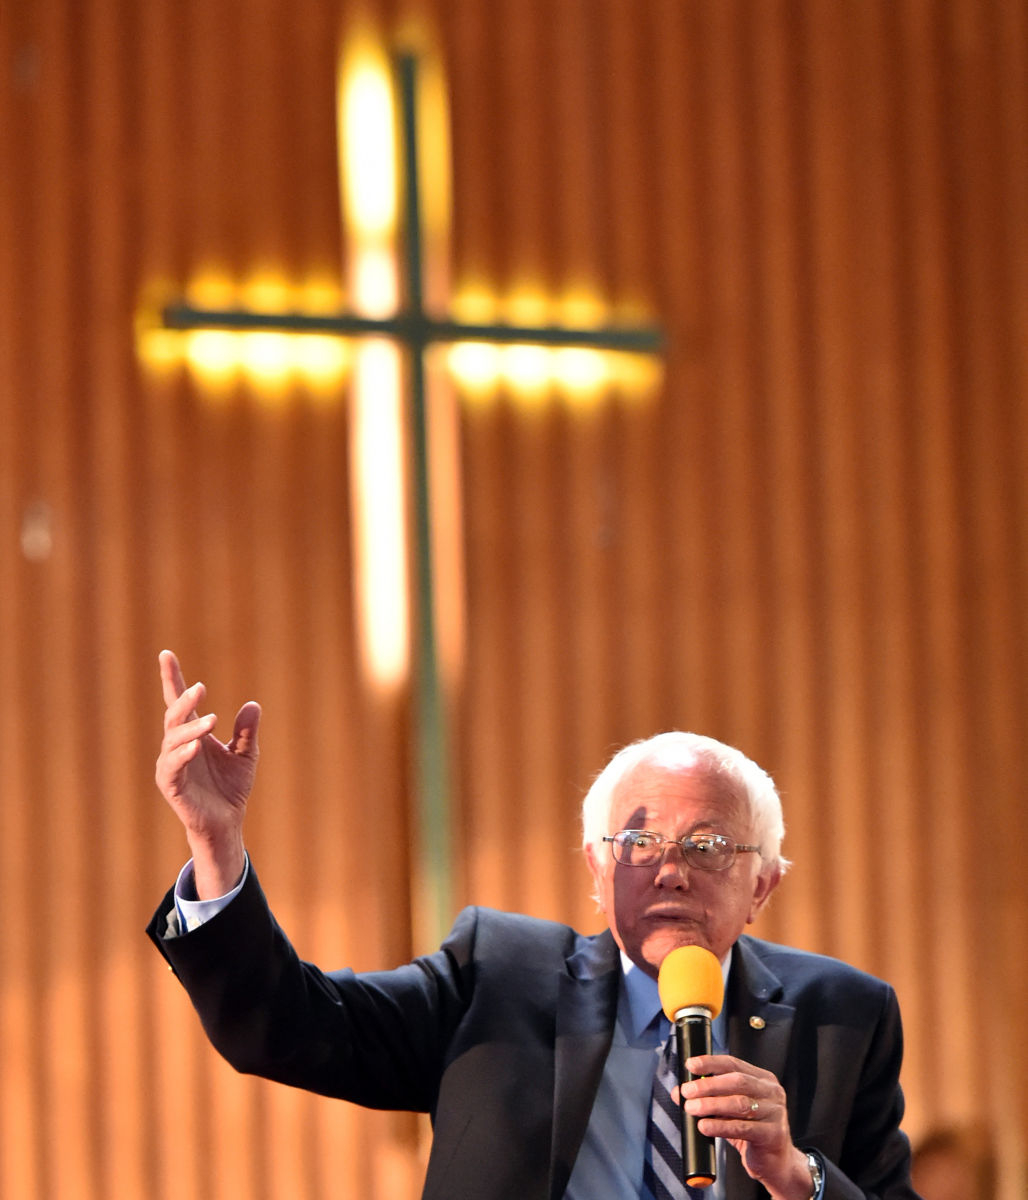 Bernie Sanders speaks at a church during a campaign event in Oakland, California.